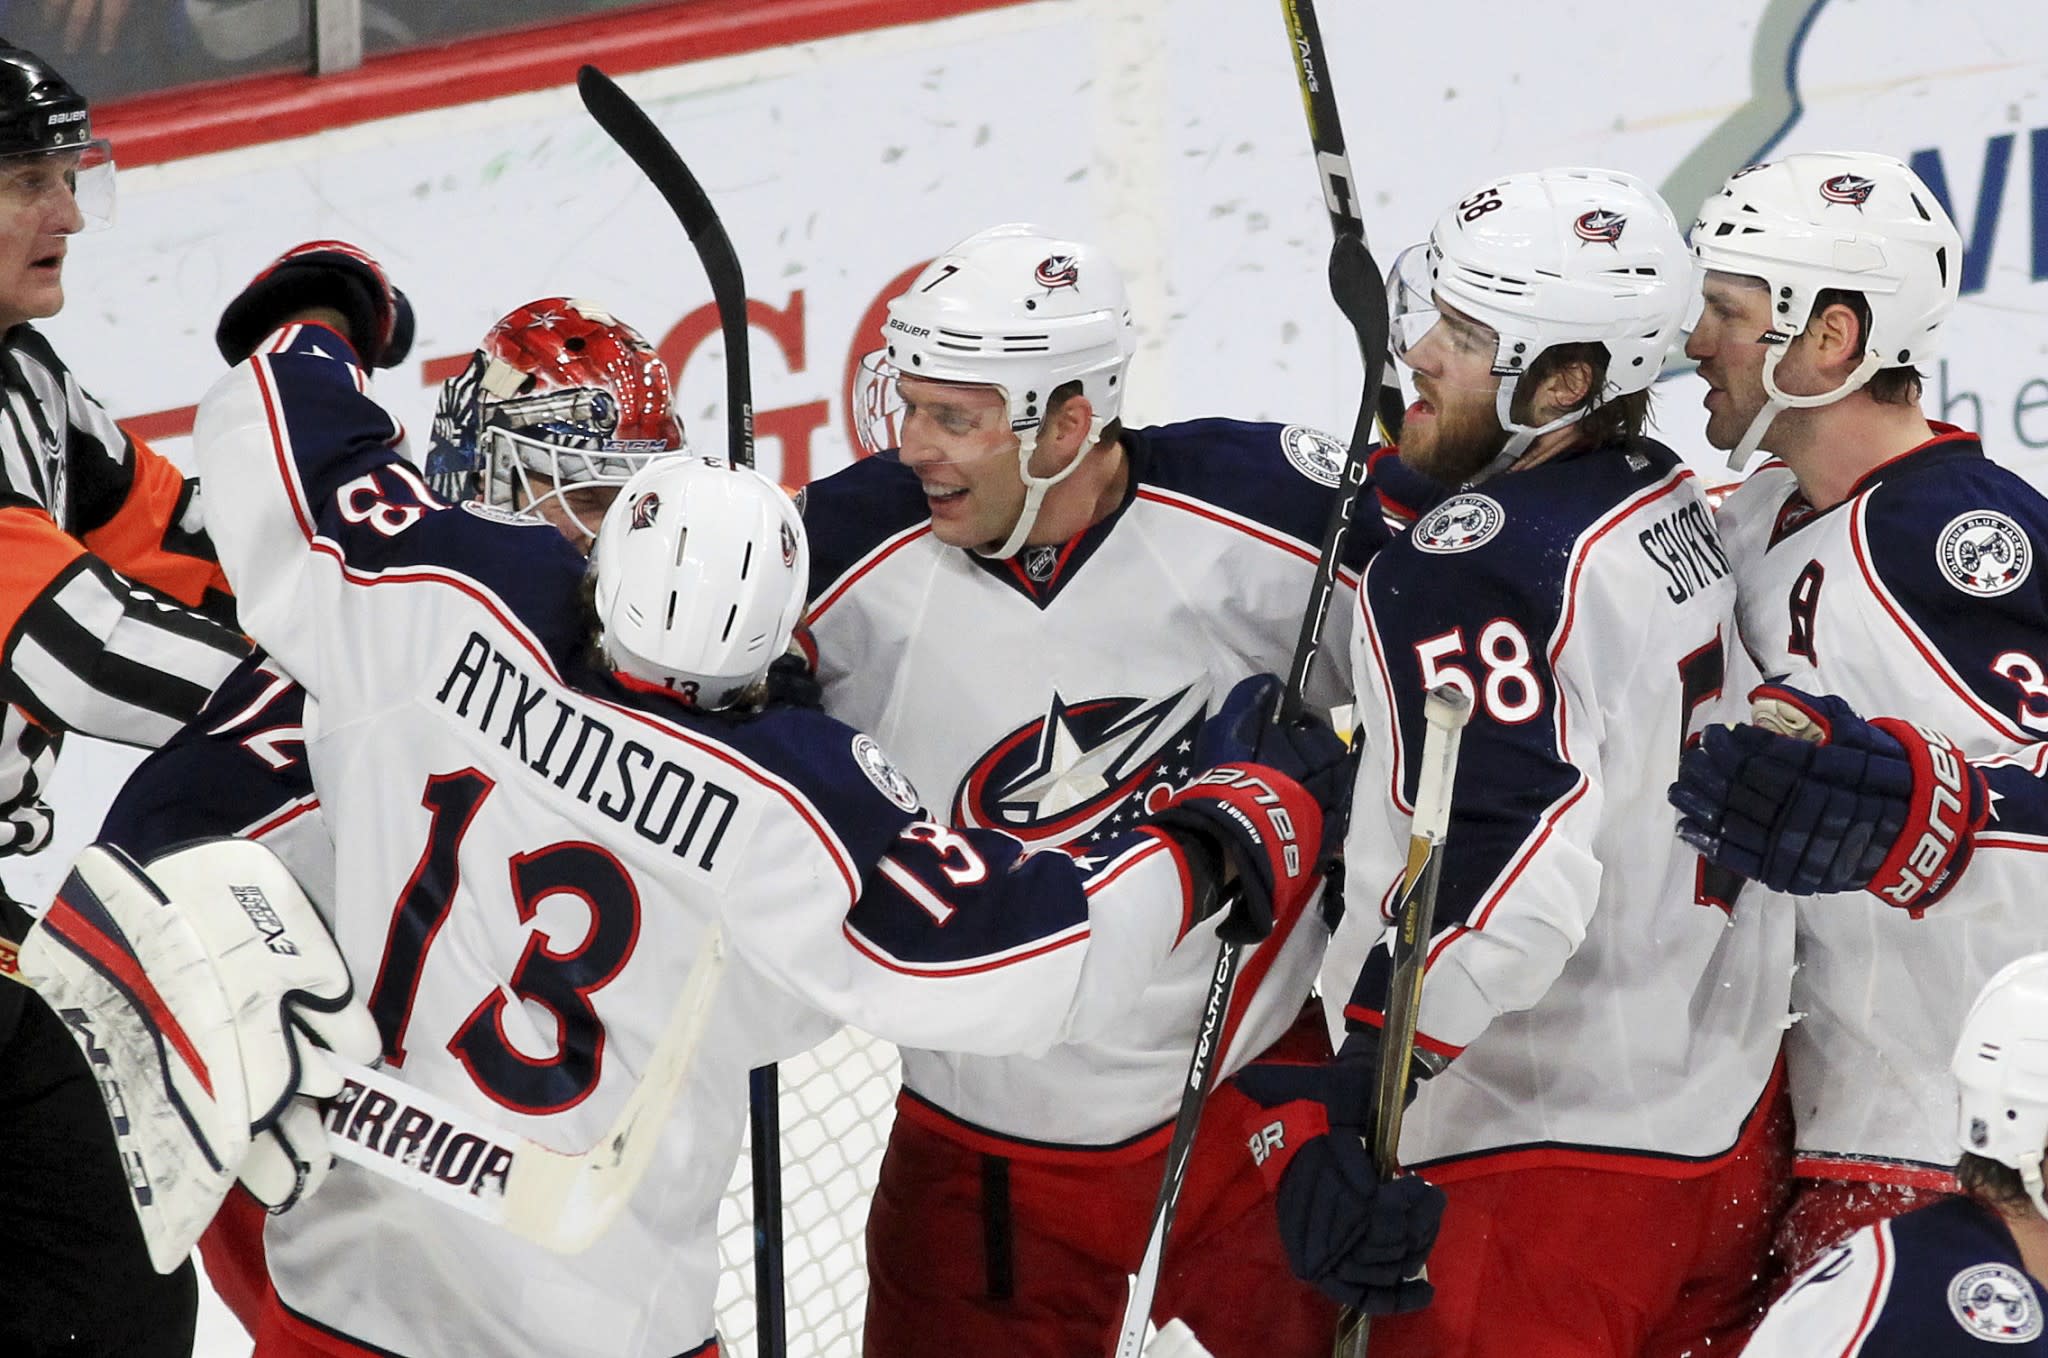 Blue Jackets victorious in Unsustainabowl, extend streak to 15 games